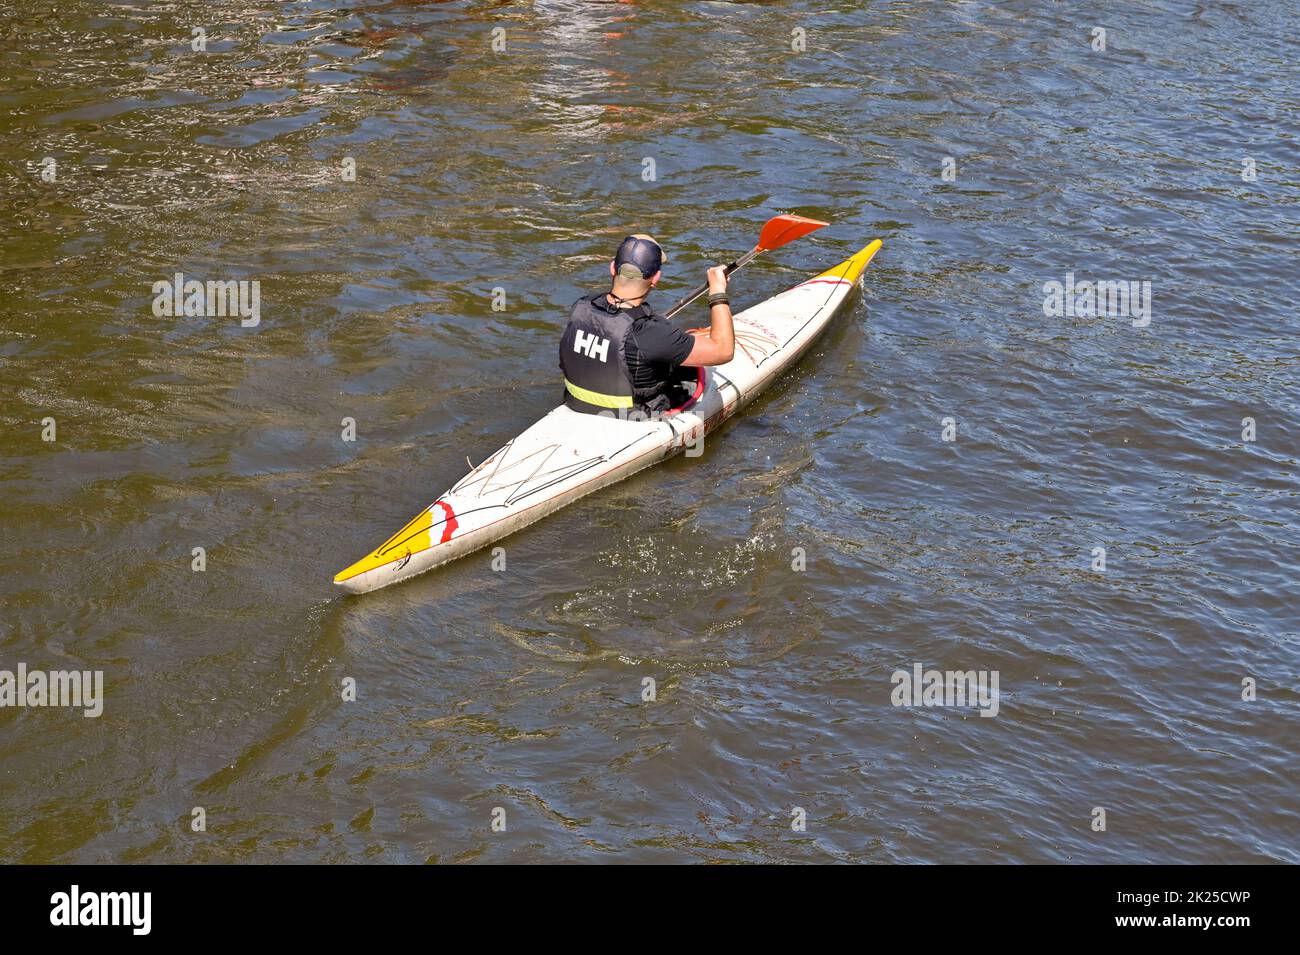 Amsterdam, Netherlands - August 2022: Person paddling a kayak on one of the city's canals Stock Photo